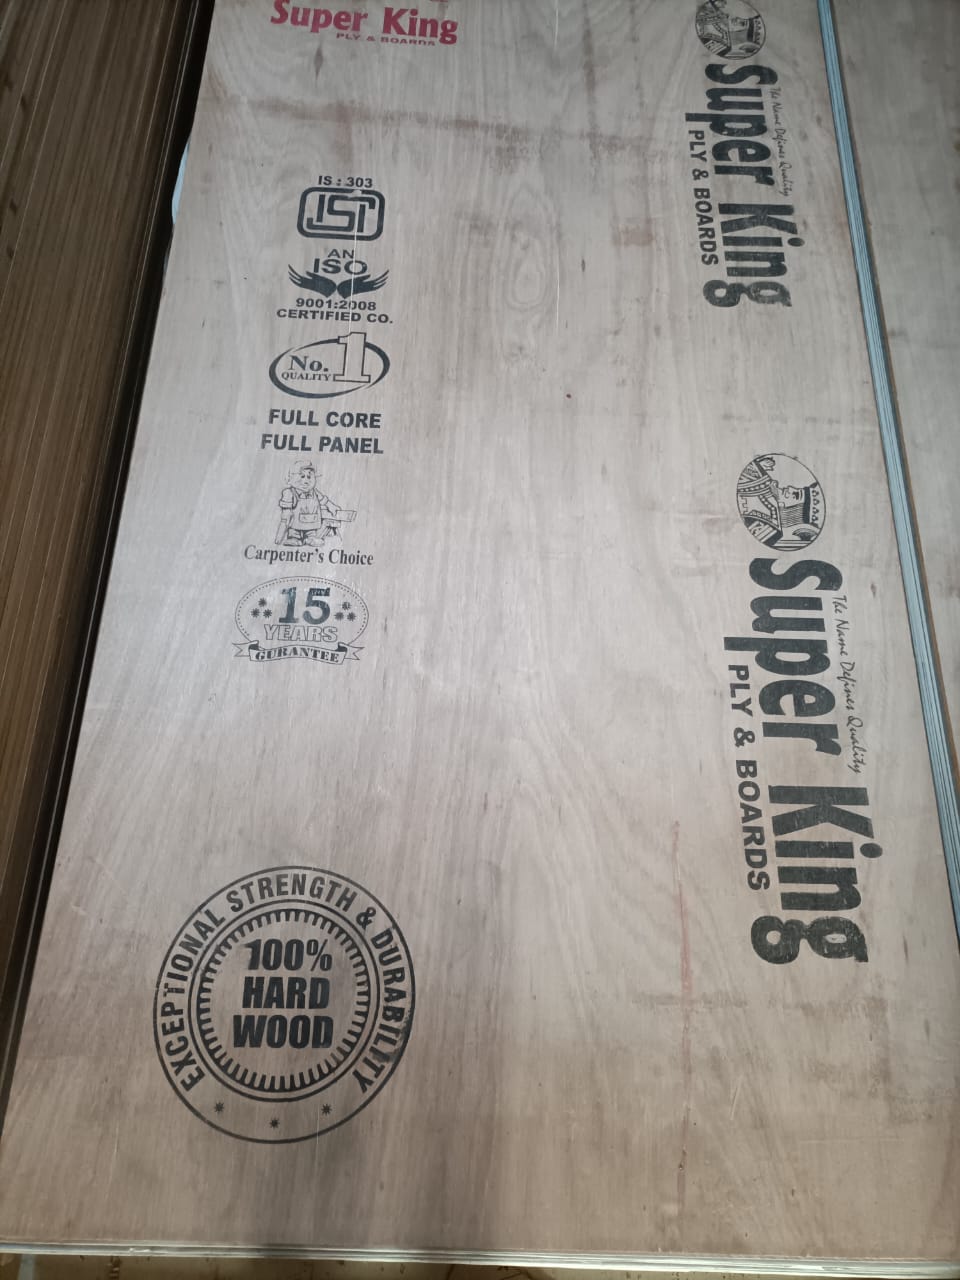 Super King 303 commercial plywood. 